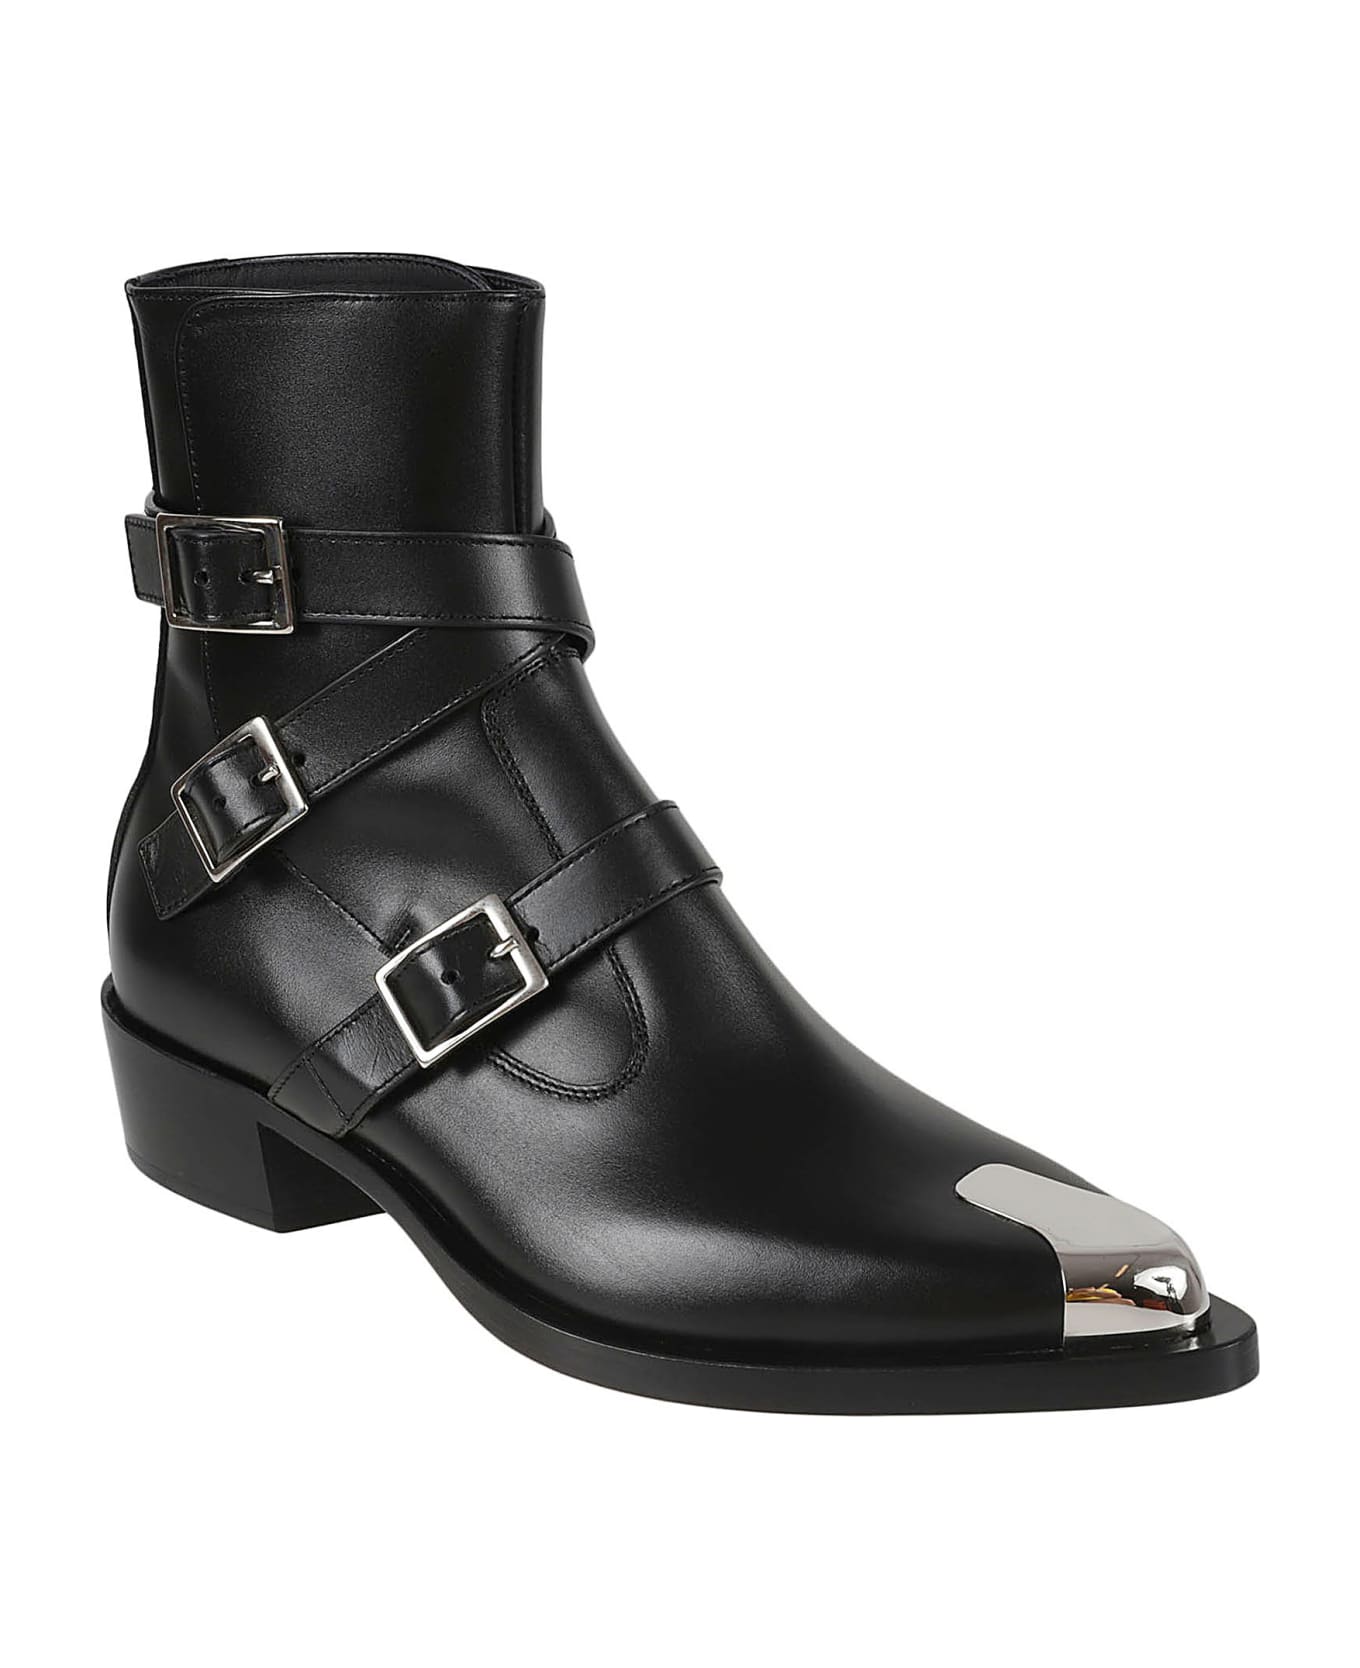 Alexander McQueen Buckled Strappy Ankle Boots